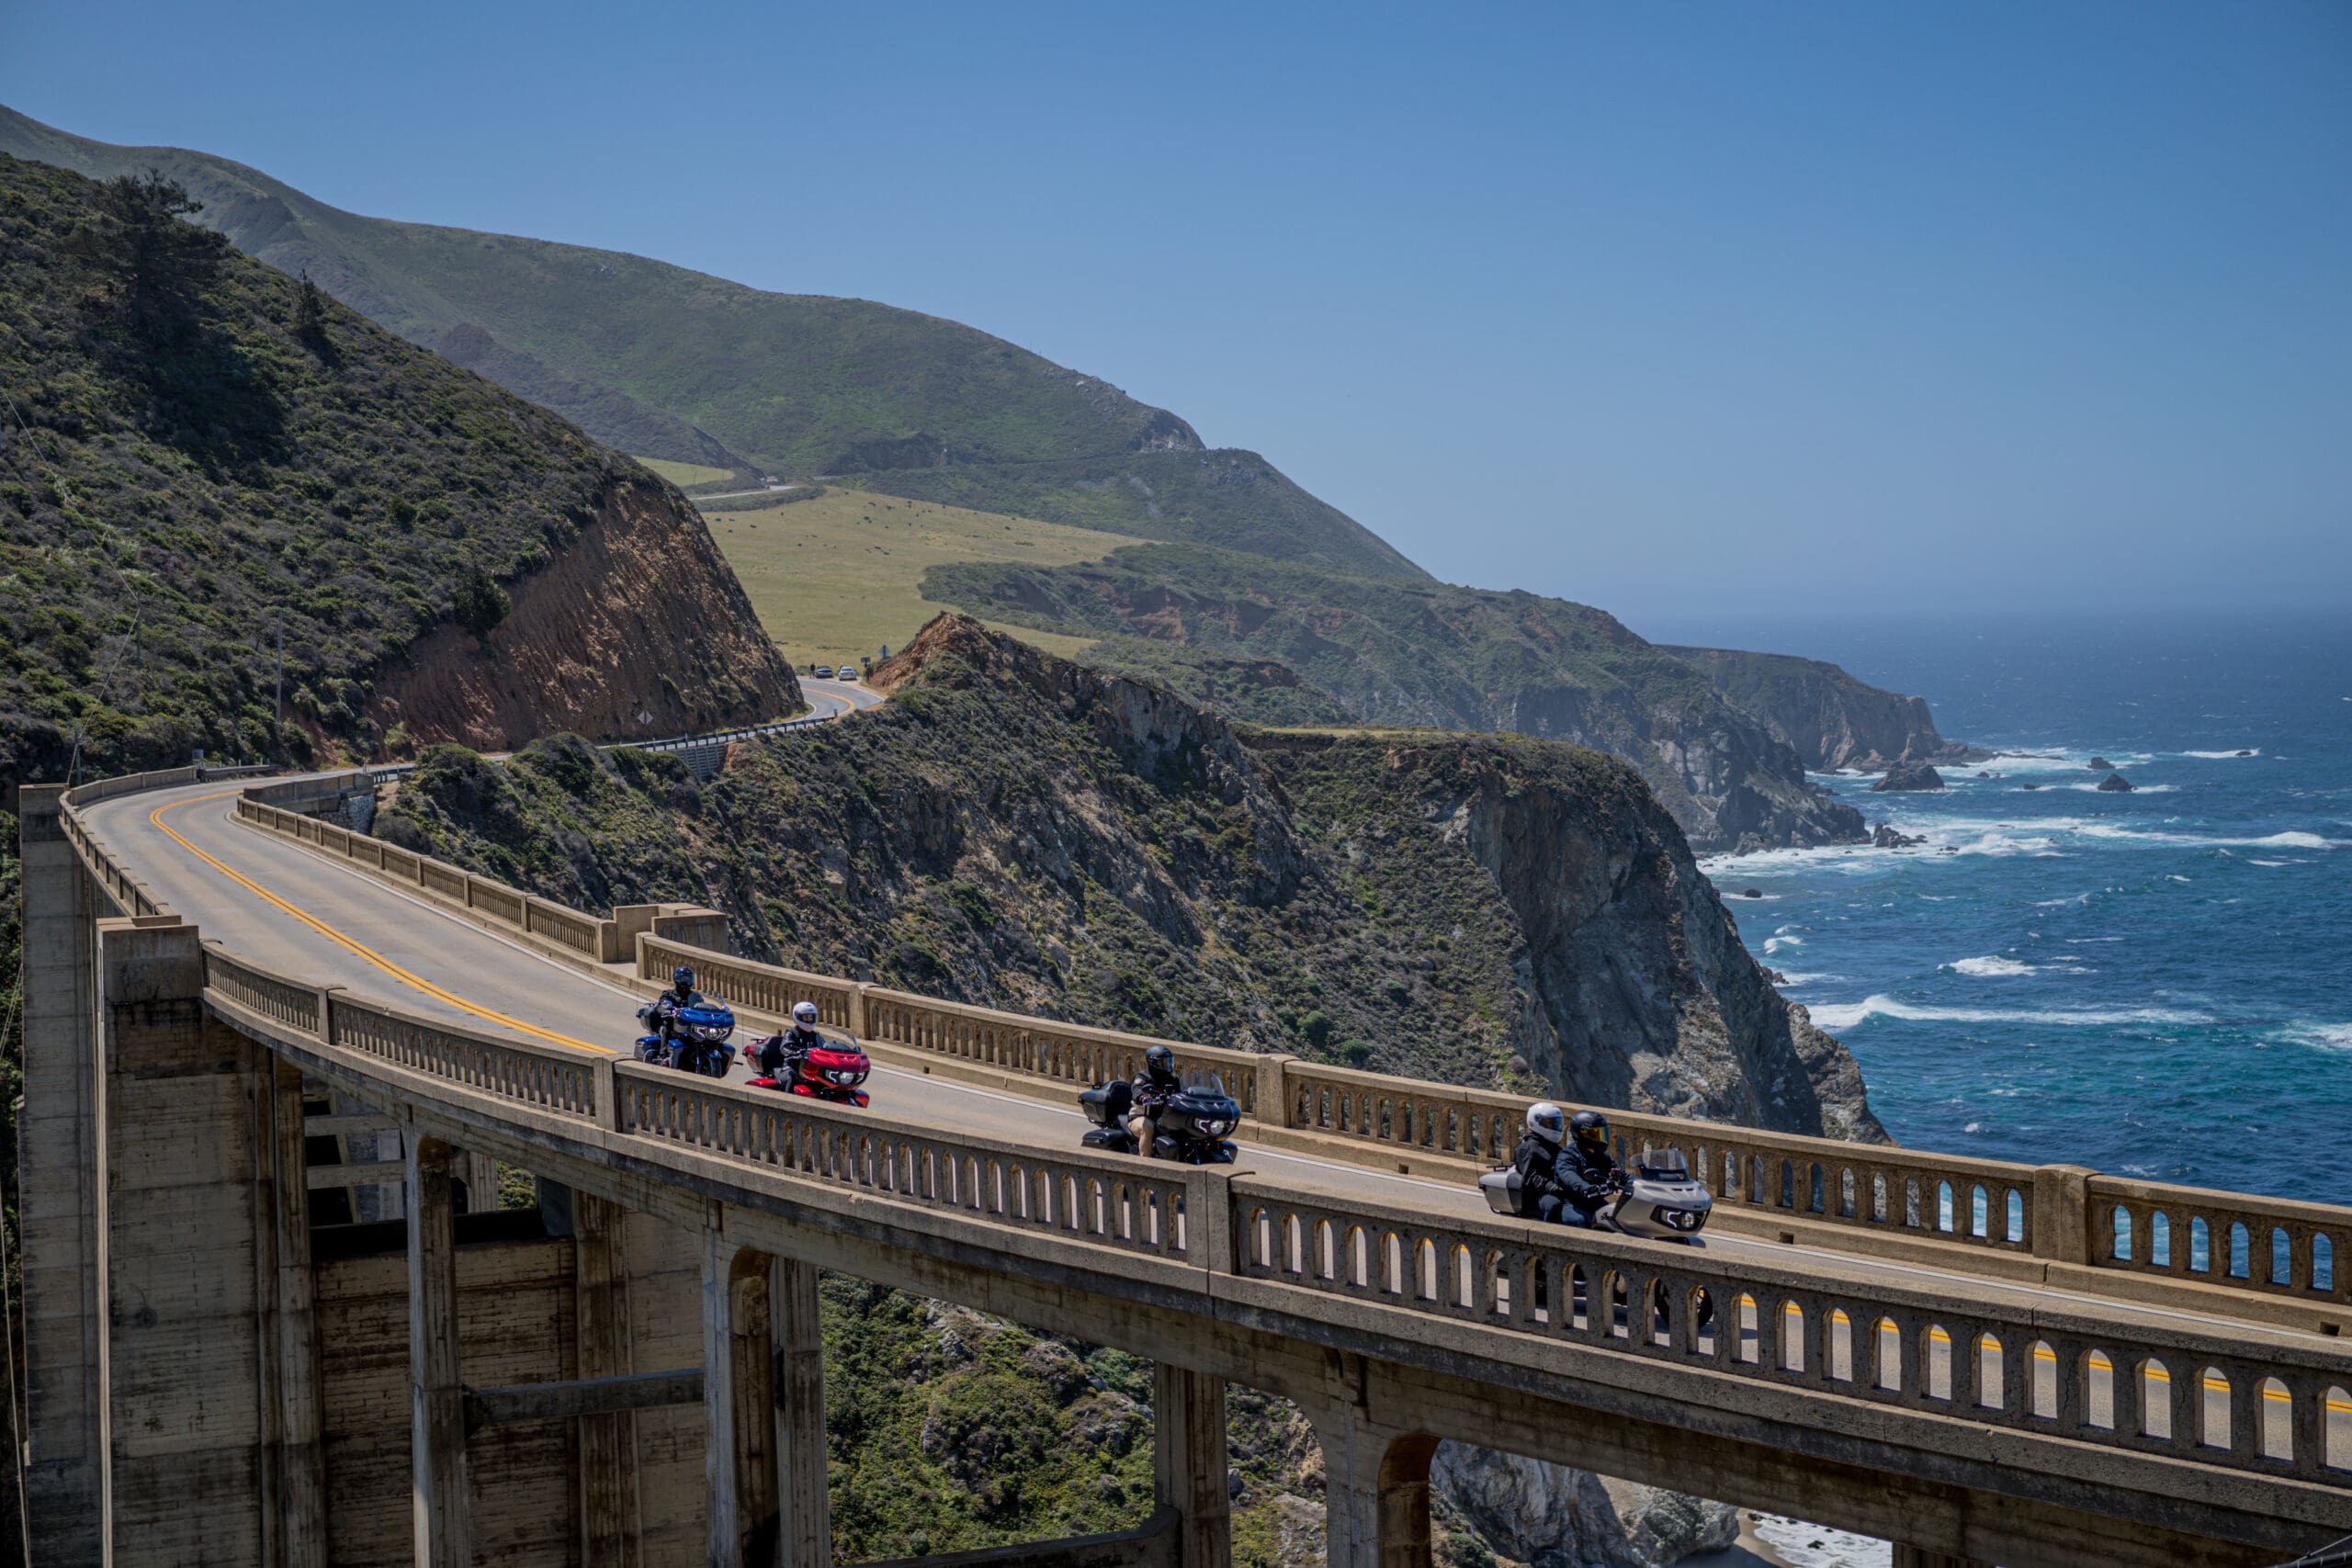 Indian motorcycles' 'Epic Pursuits' video series, with the newest episodical trifecta showing a beauty of a trip to America's West Coast. All media courtesy of Inain Motorcycles' recent press release.